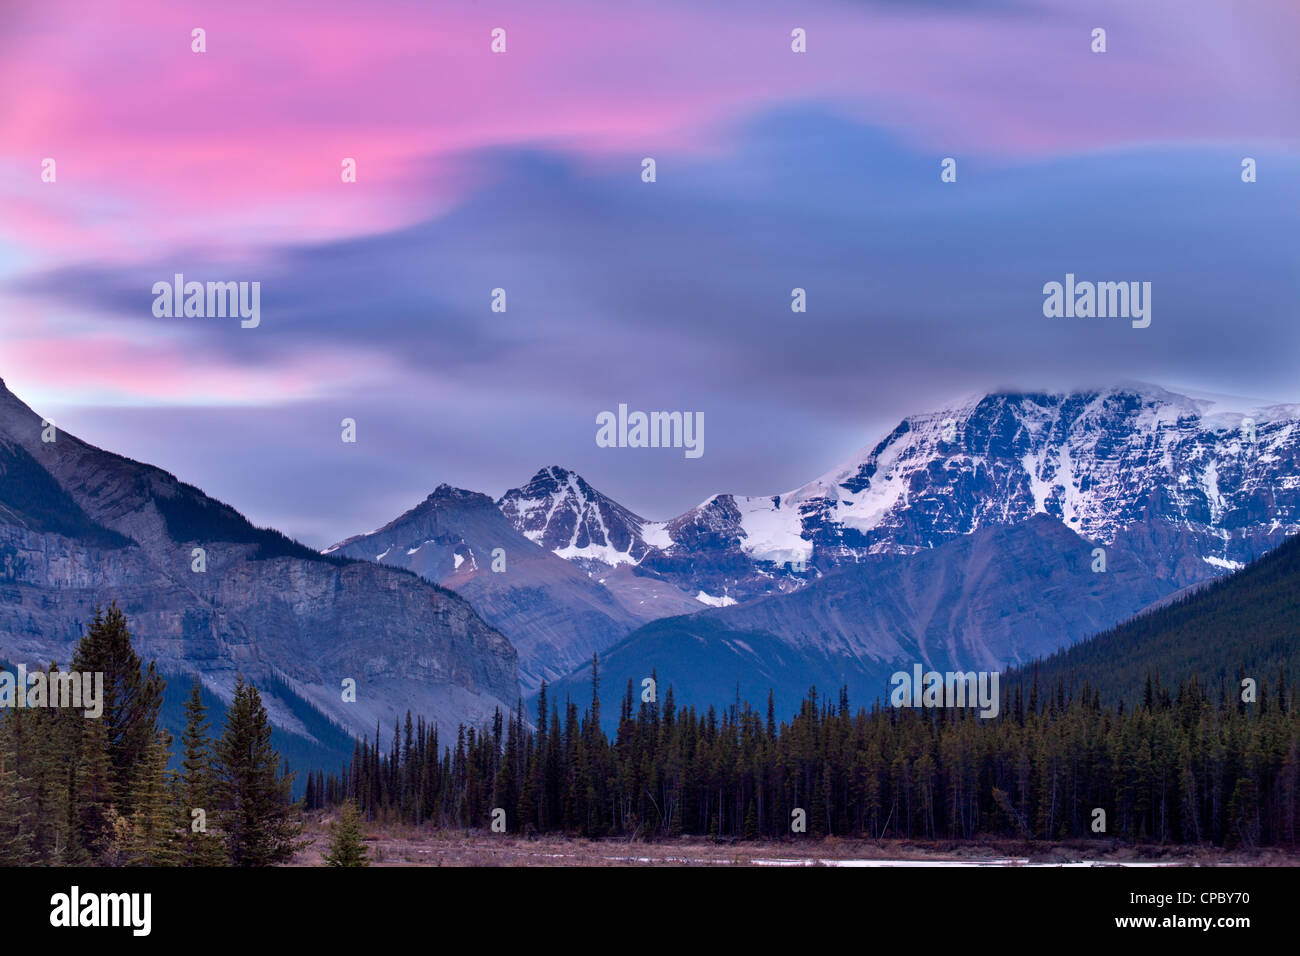 Alpenglow on clouds over Mount Kitchener and Beauty Creek-Jasper National Park, Alberta, Canada. Stock Photo